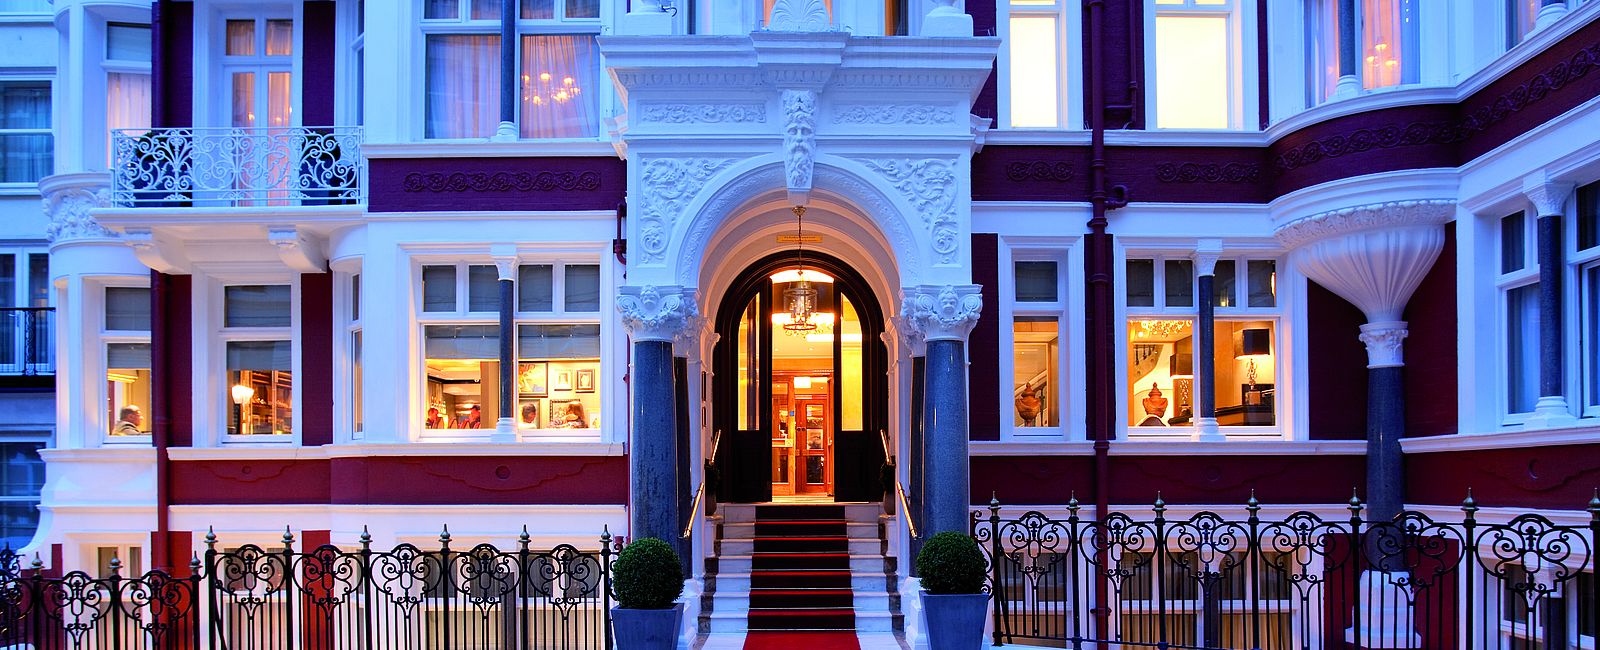 HOTEL ANGEBOTE
 St. James‘s Hotel & Club: Sommer Deal 
